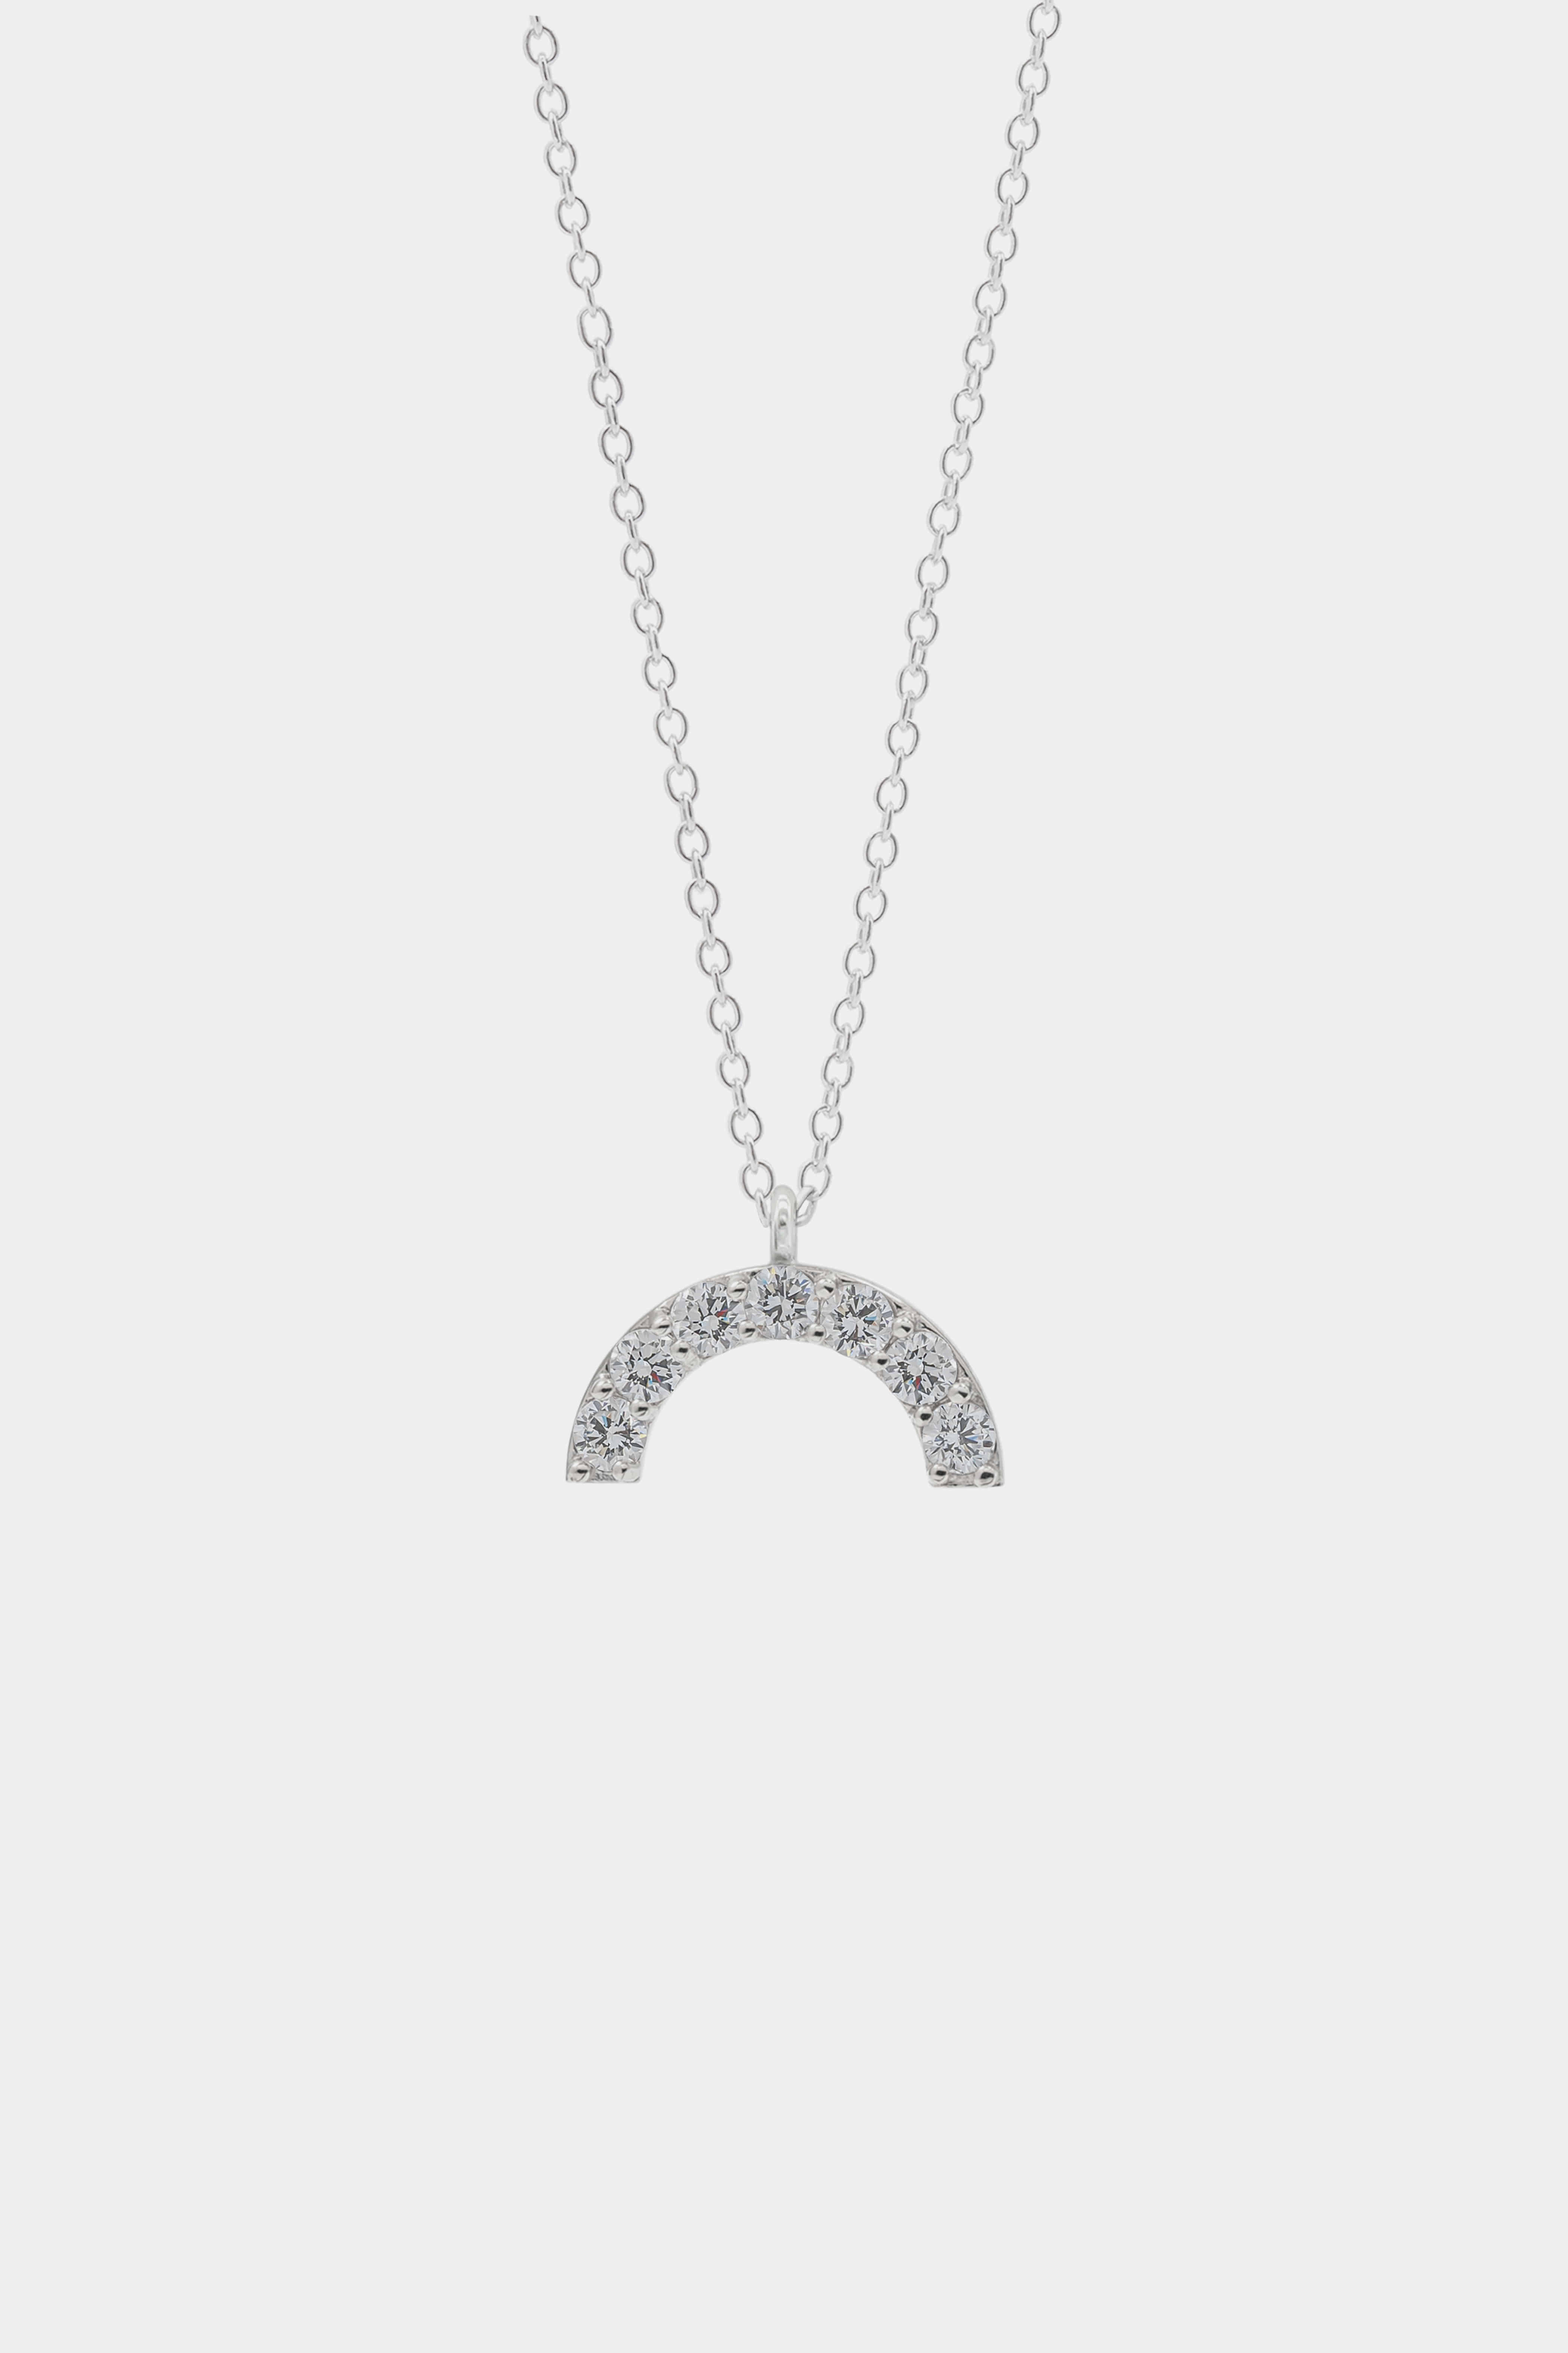 U pipe necklace (dia) - looped